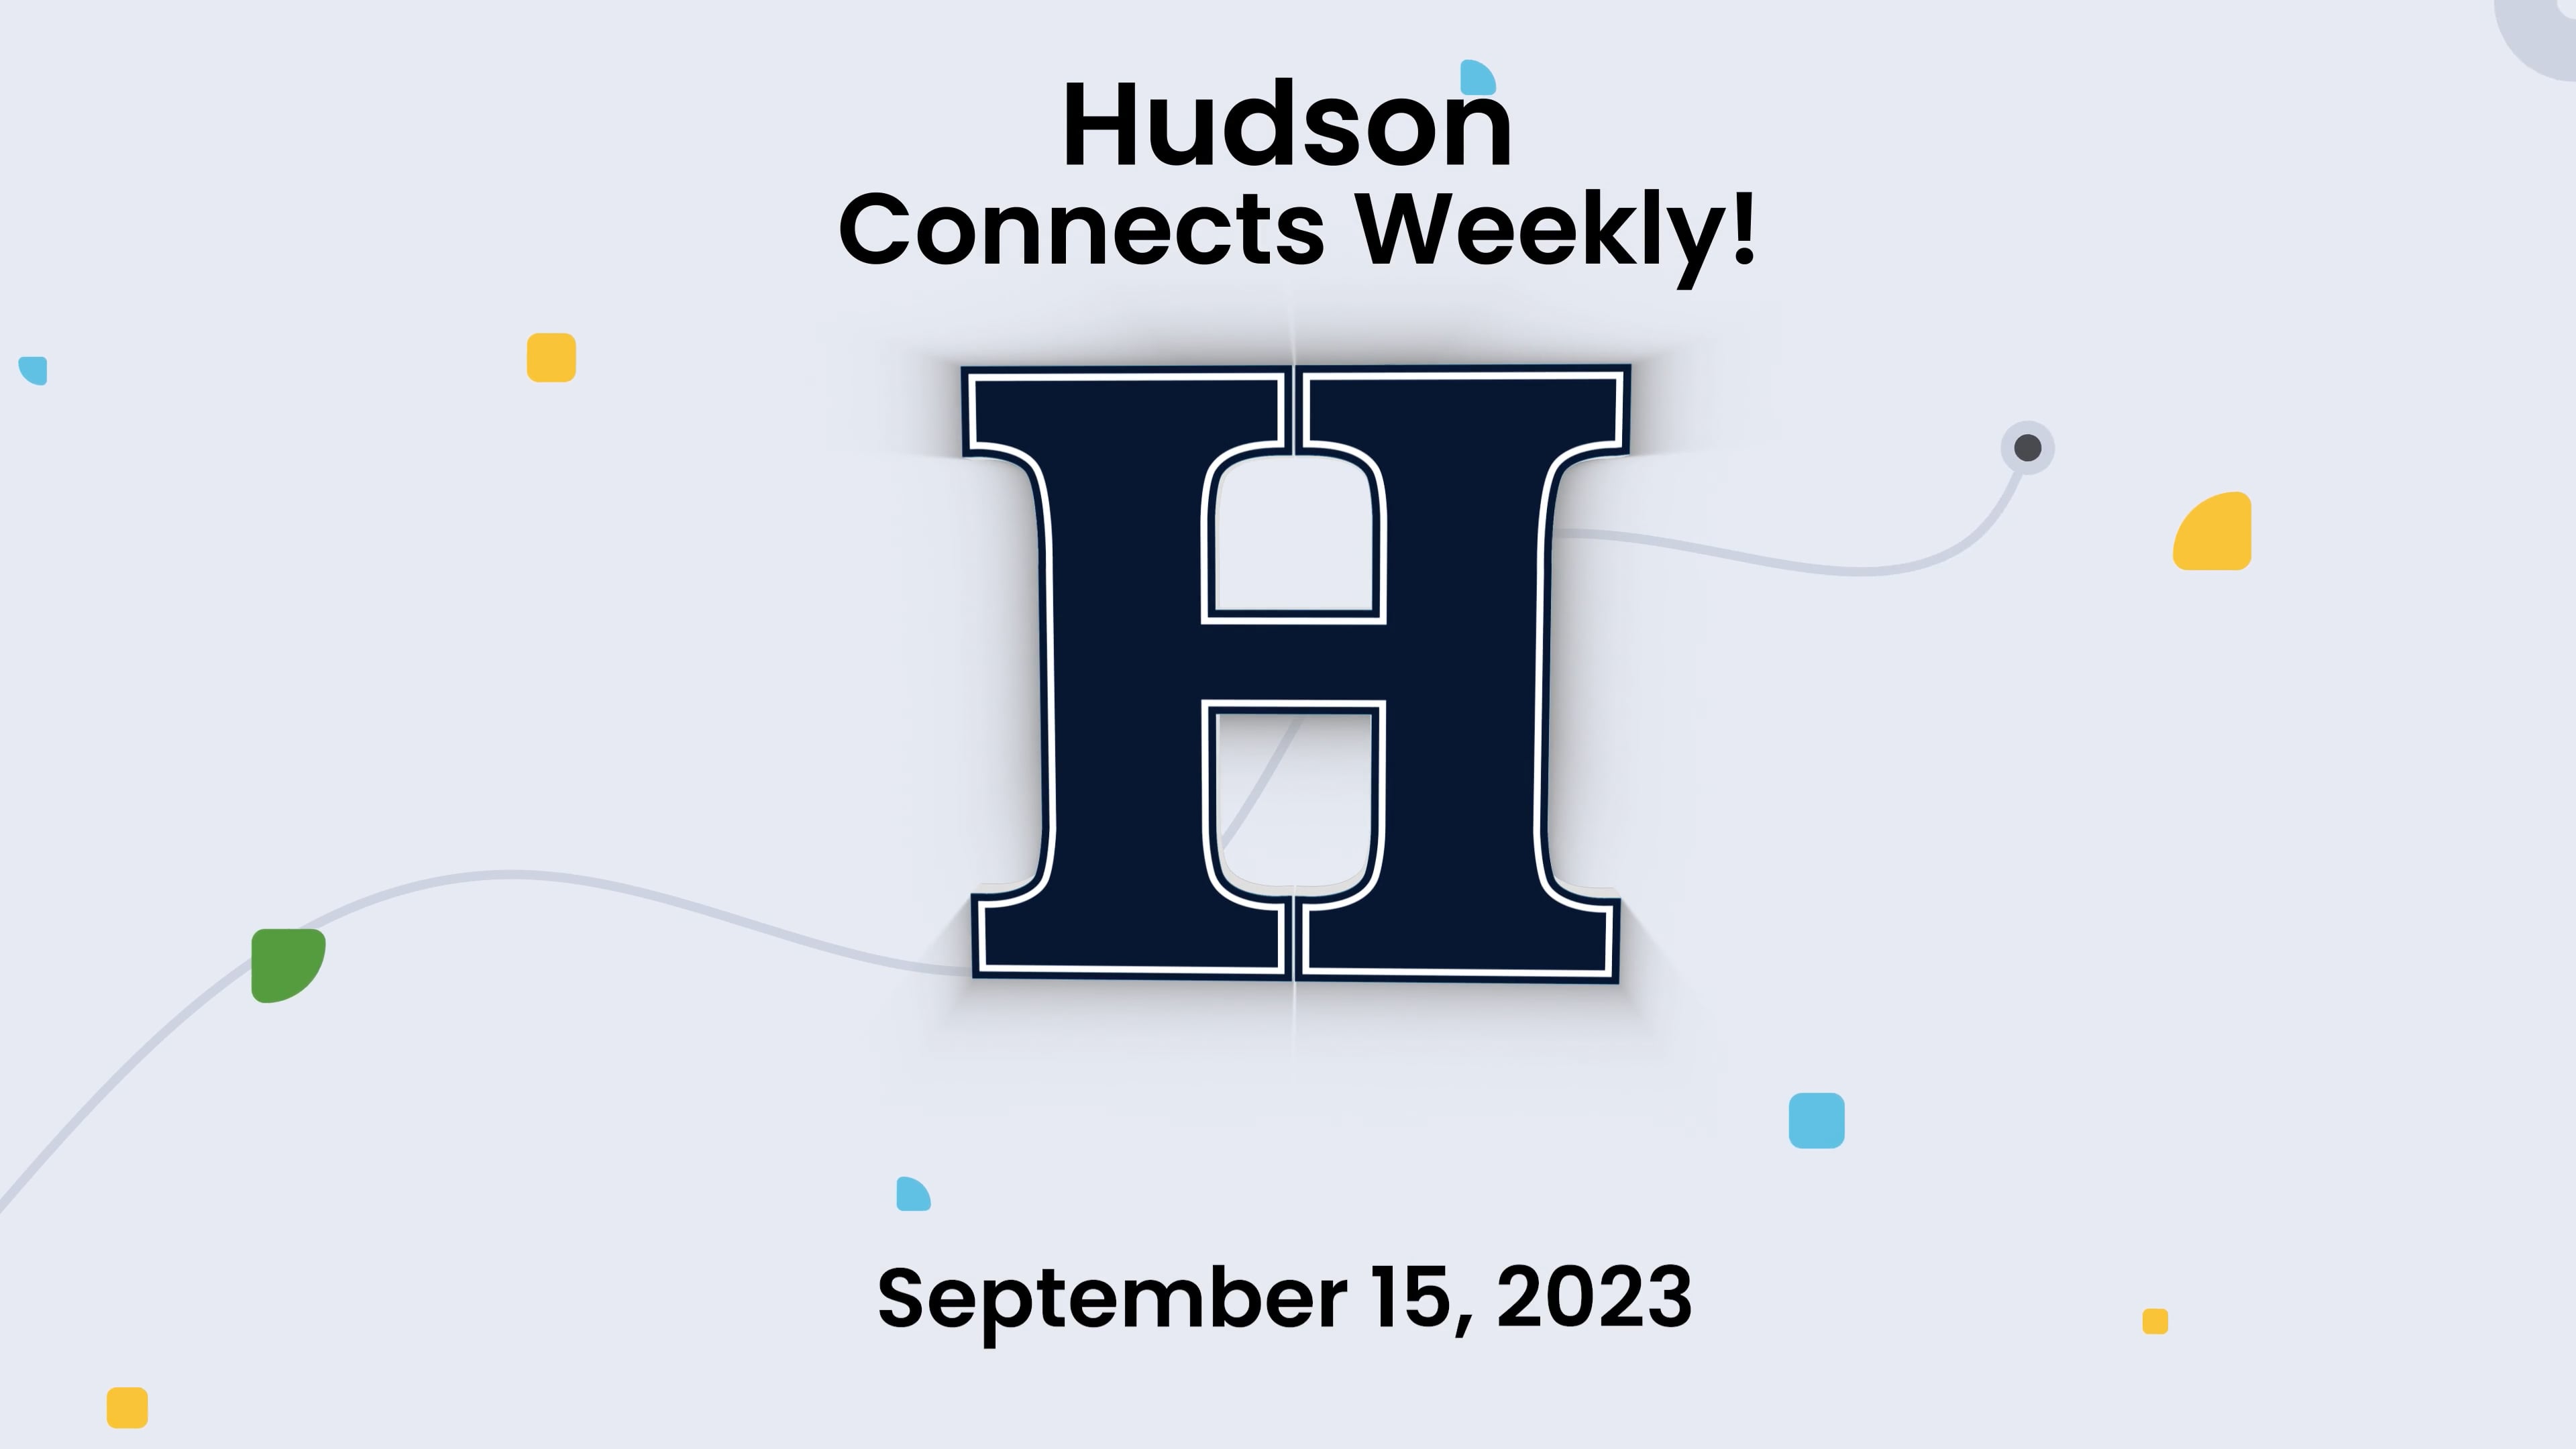 Hudson Connects Weekly - Sept. 15, 2023